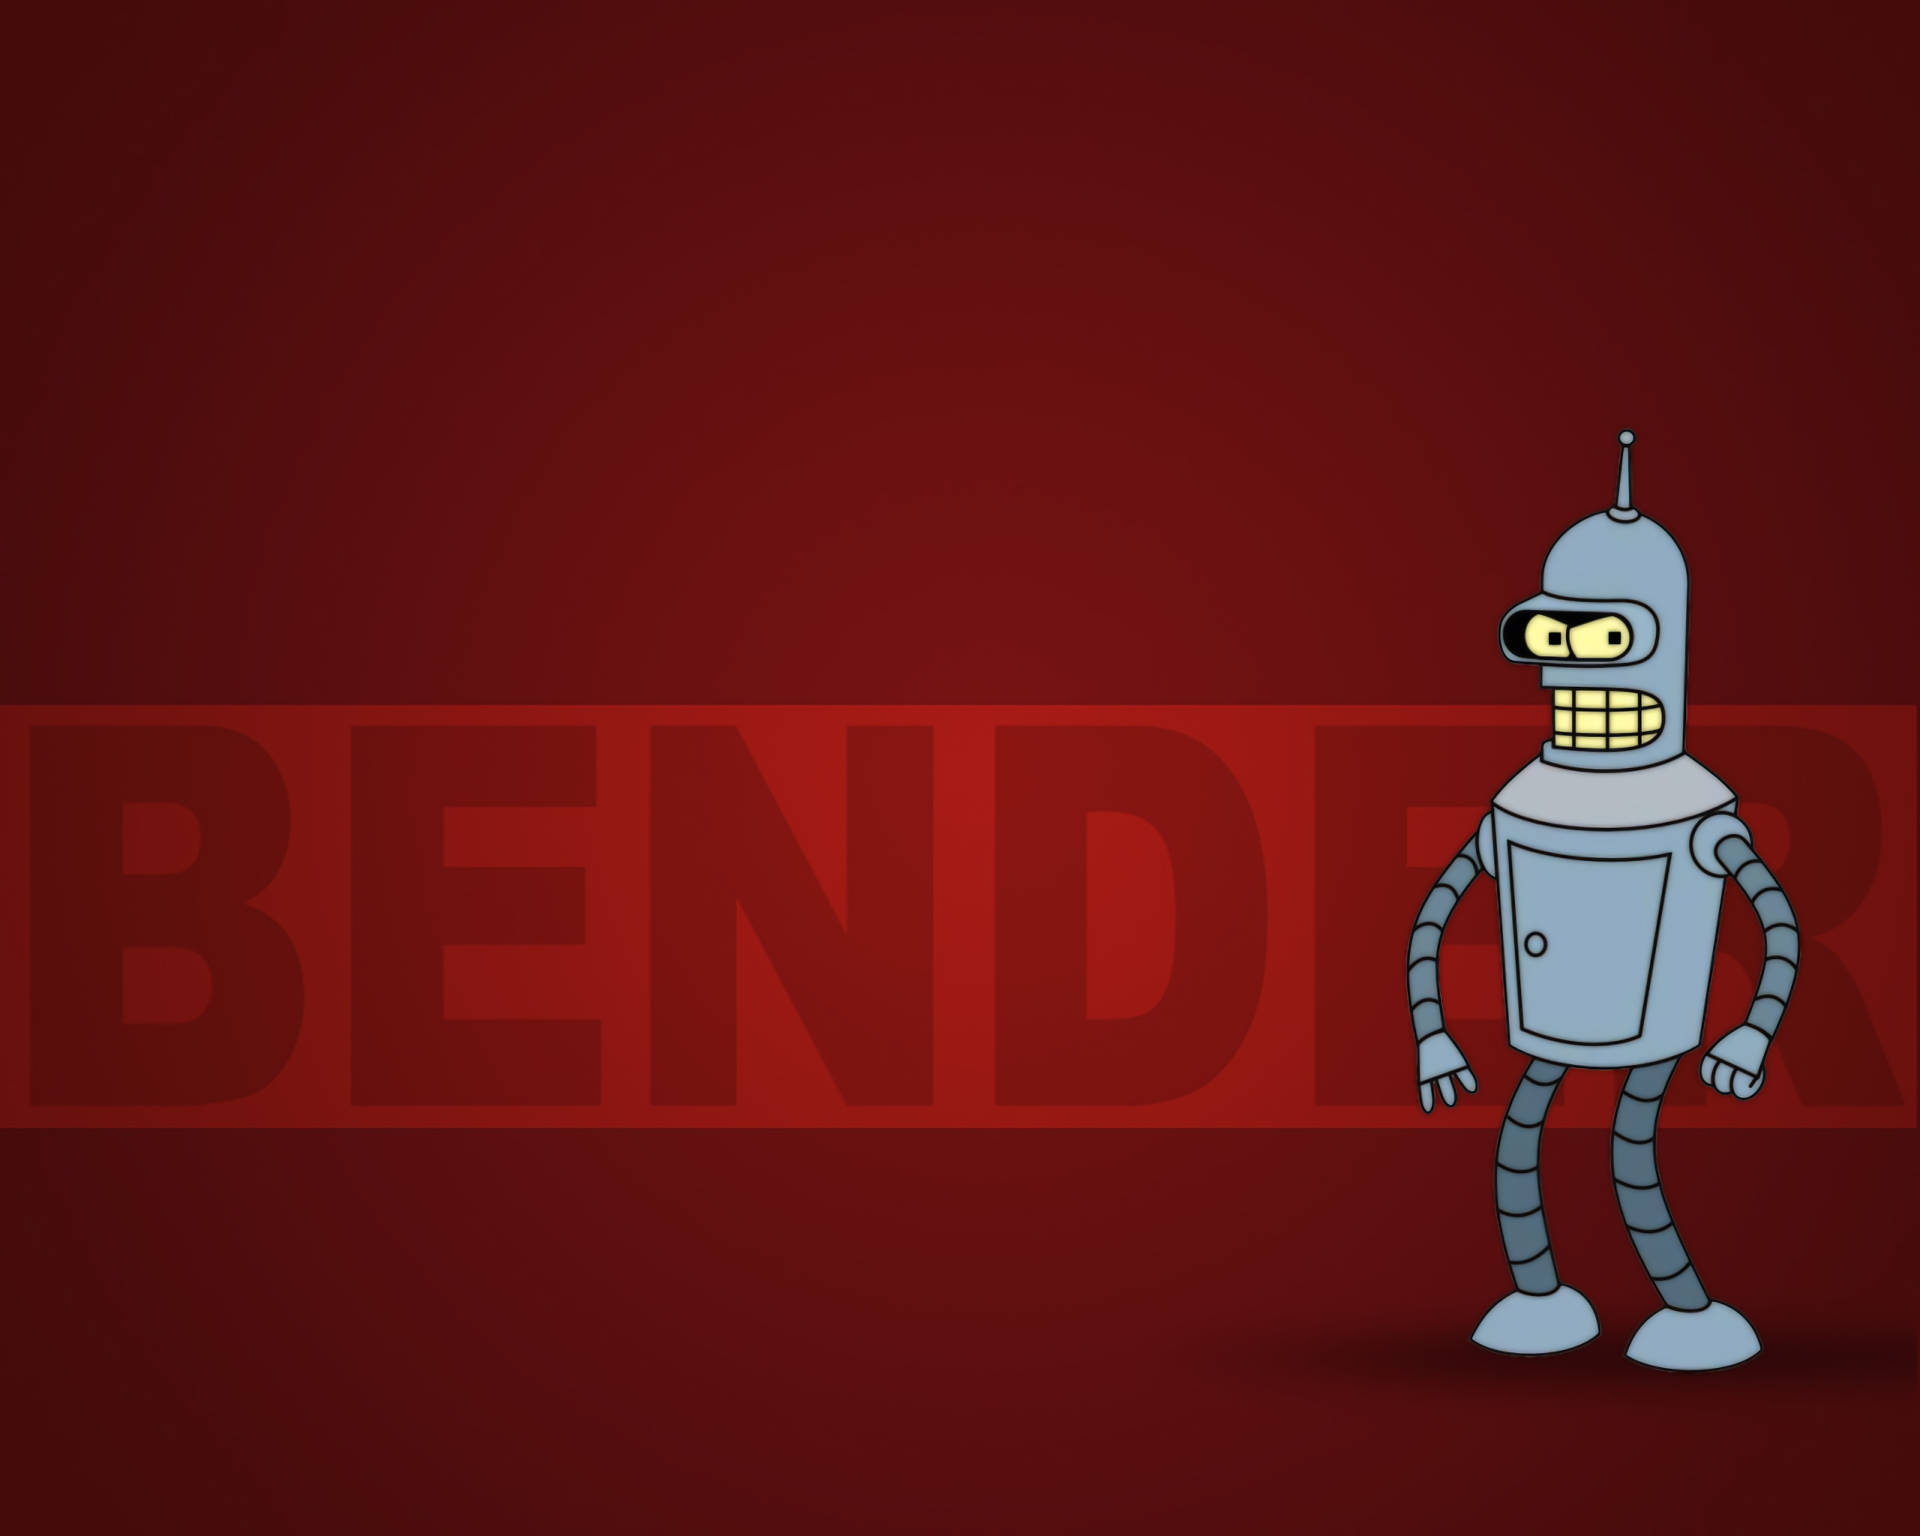 Bender, The Iconic Futurama Robot In Action Background